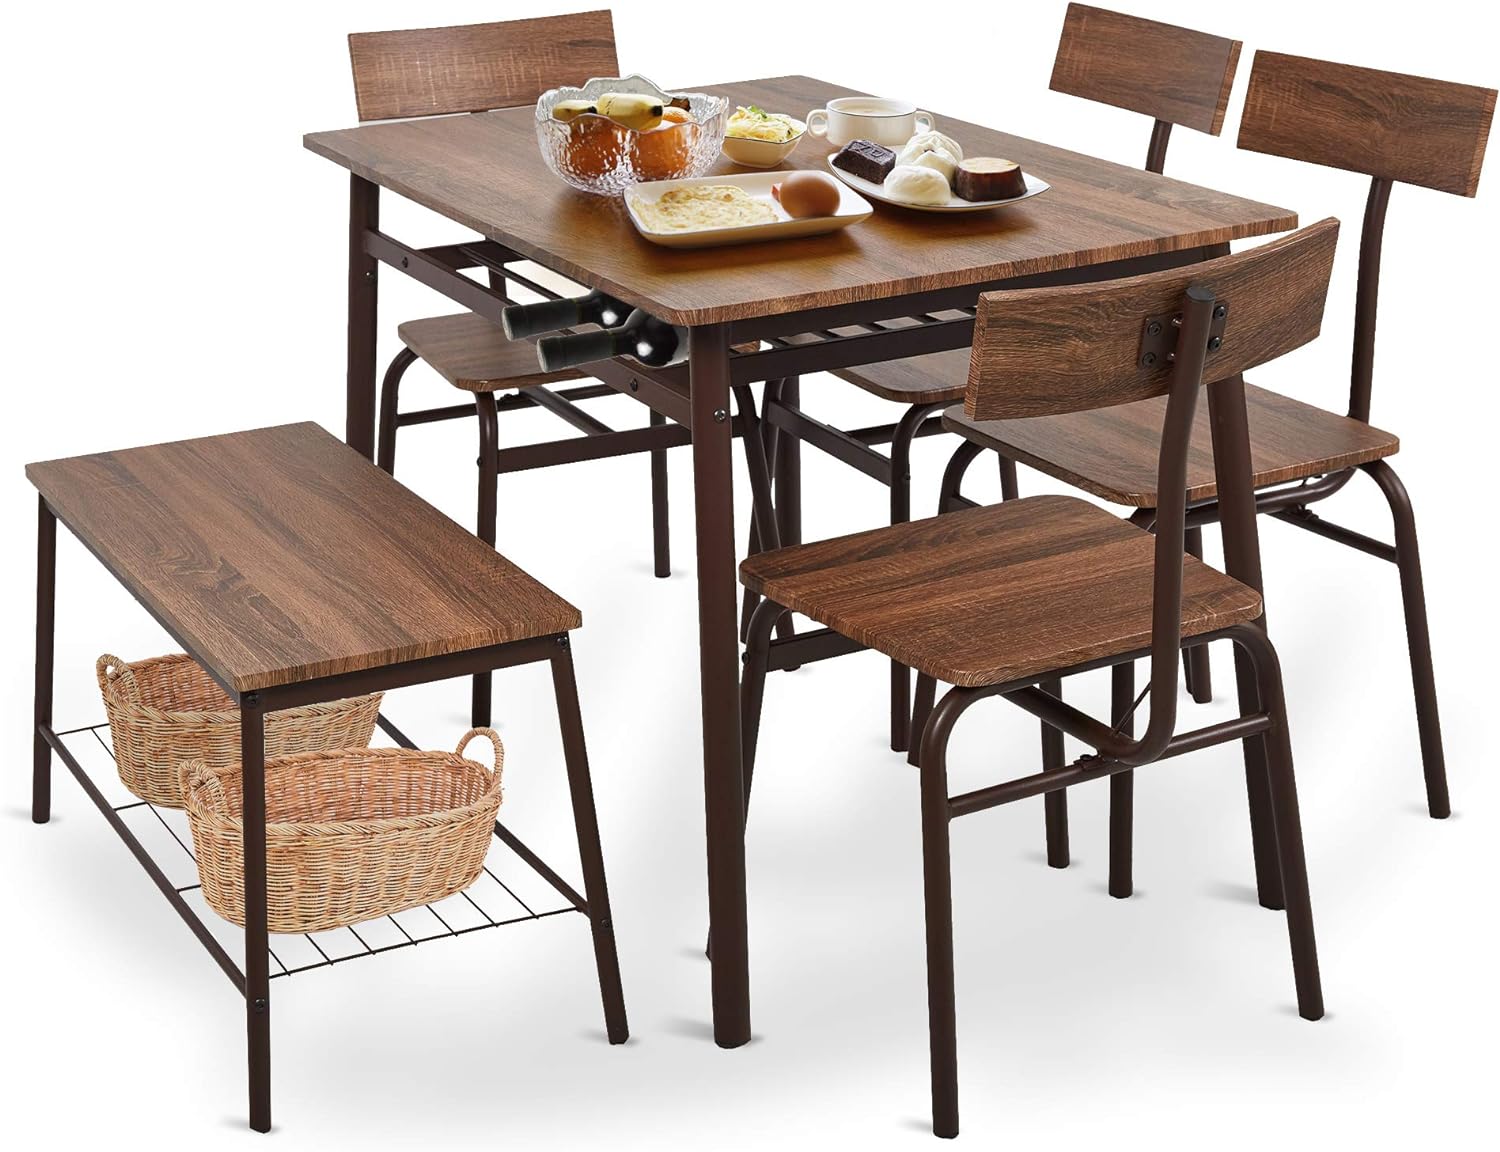 6 Piece Dining Table Set, 1 Dining Table 43.3" for 4-6 with 4 Dining Chairs and 1 Bench Compact Wooden Dinette, Wood Backrest